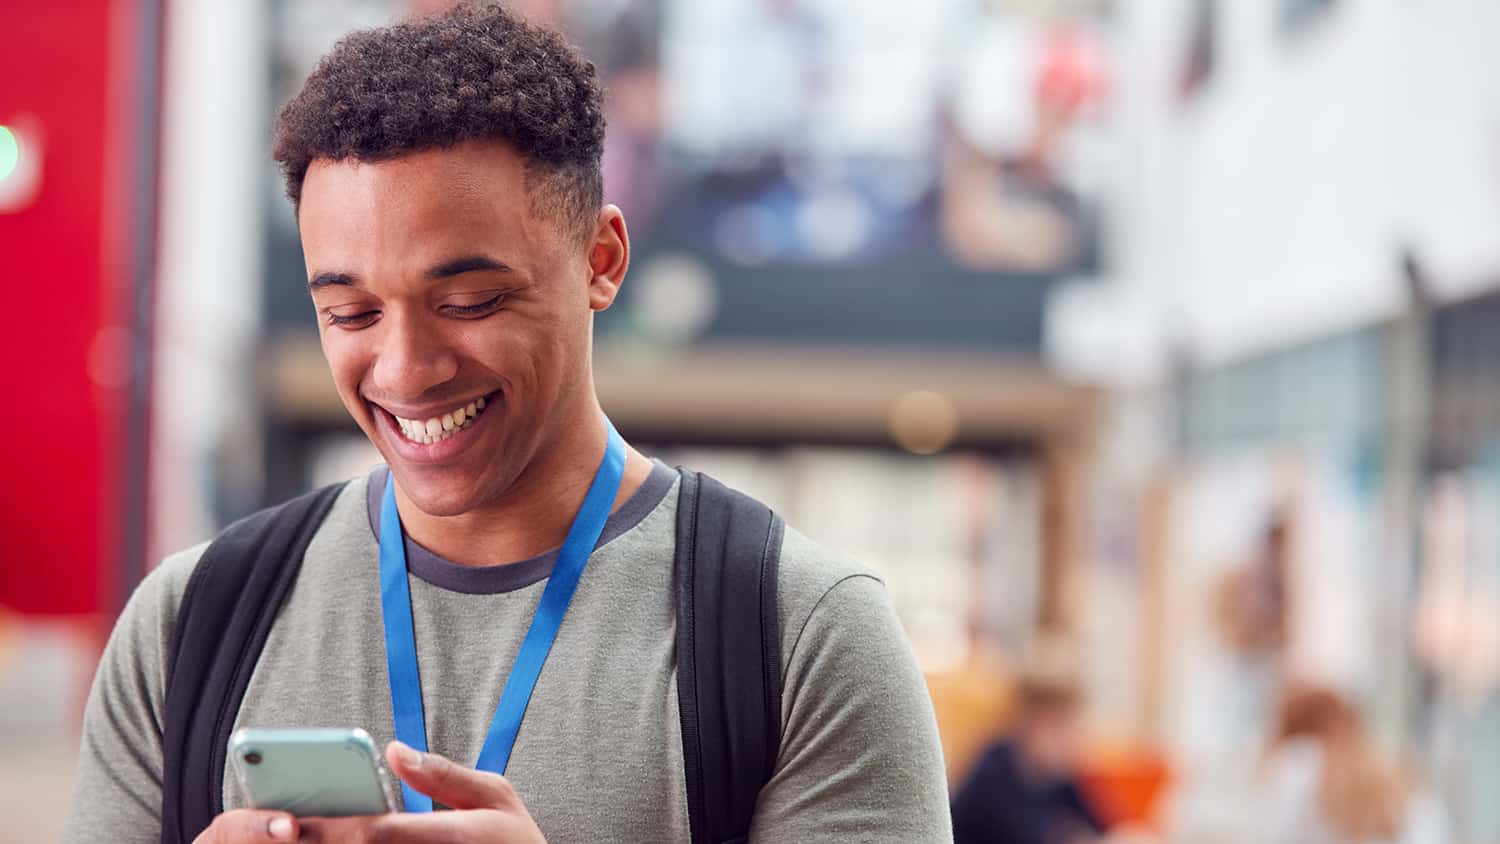 Smiling male college student checking mobile phone in busy communal campus building